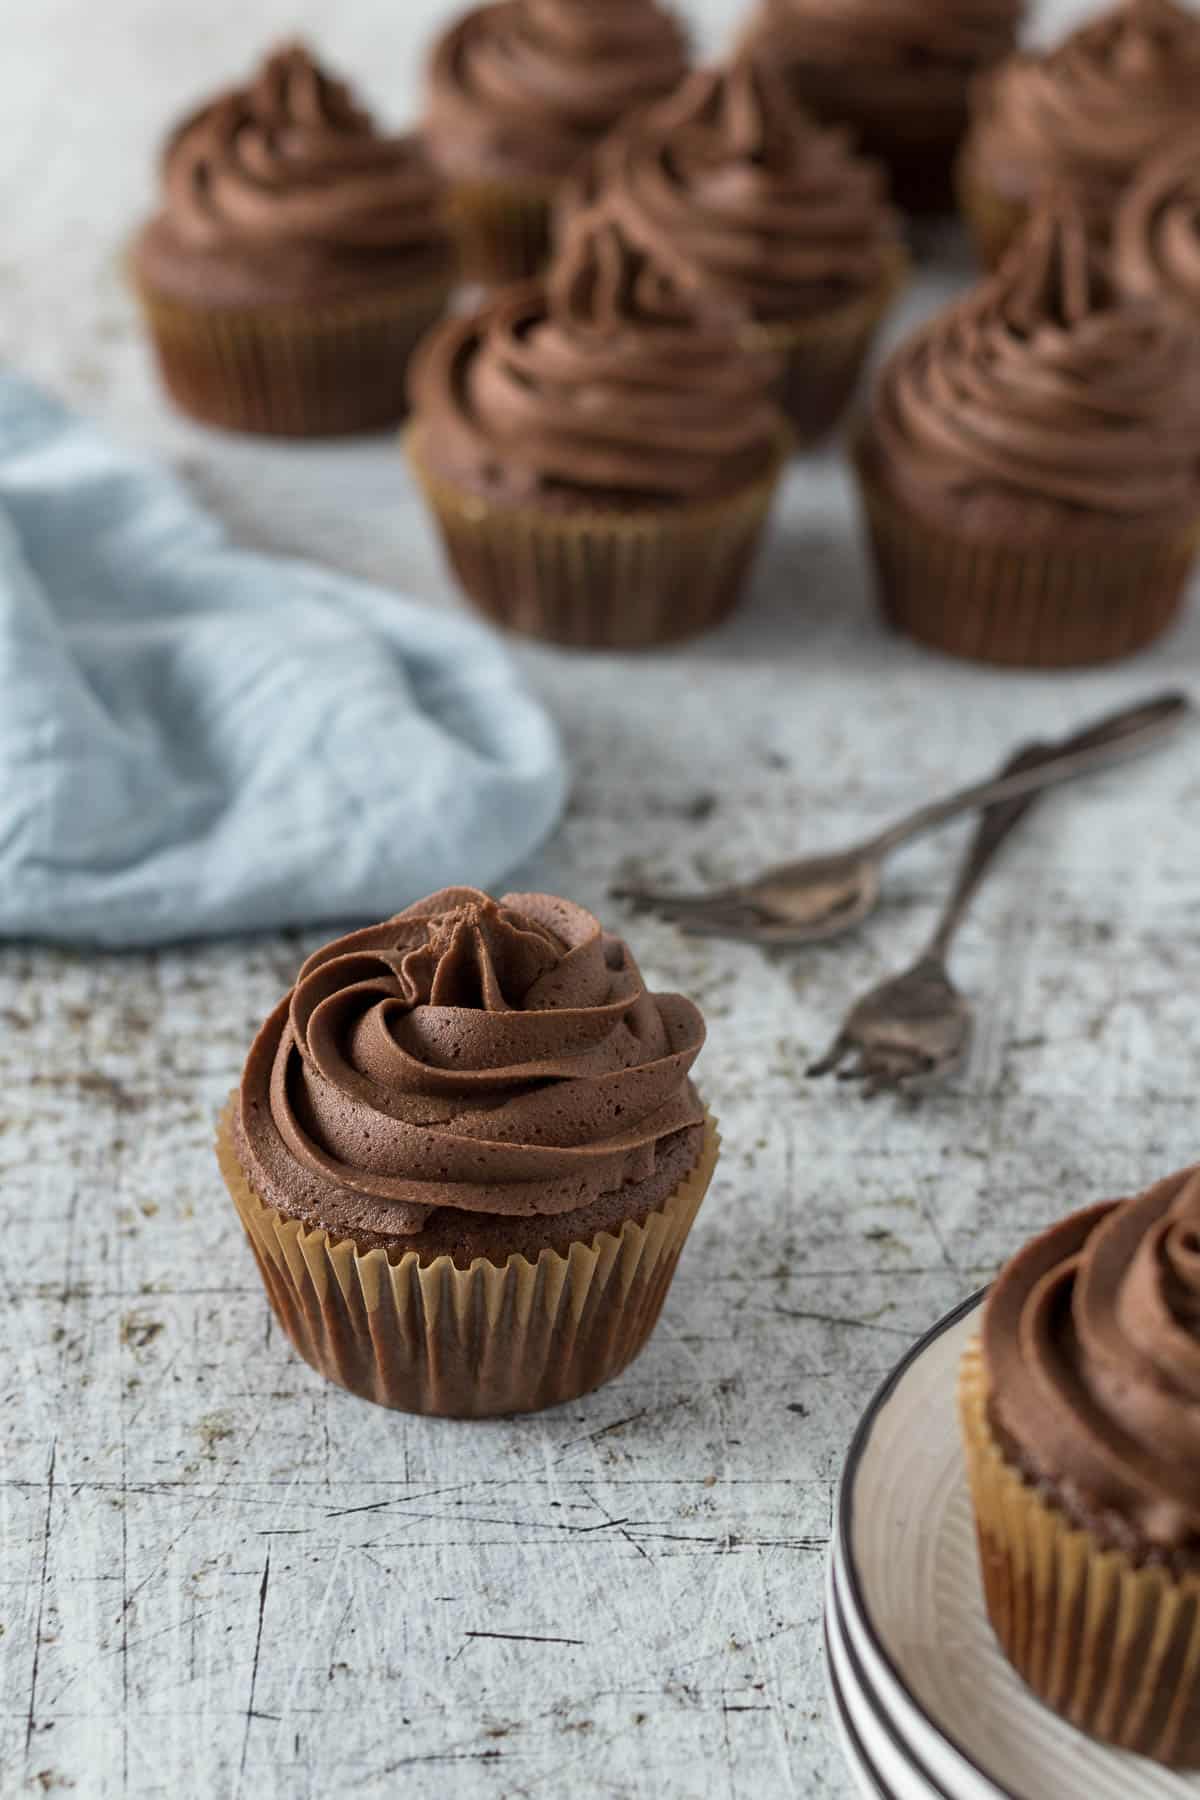 Chocolate cupcakes with a chocolate buttercream swirl.